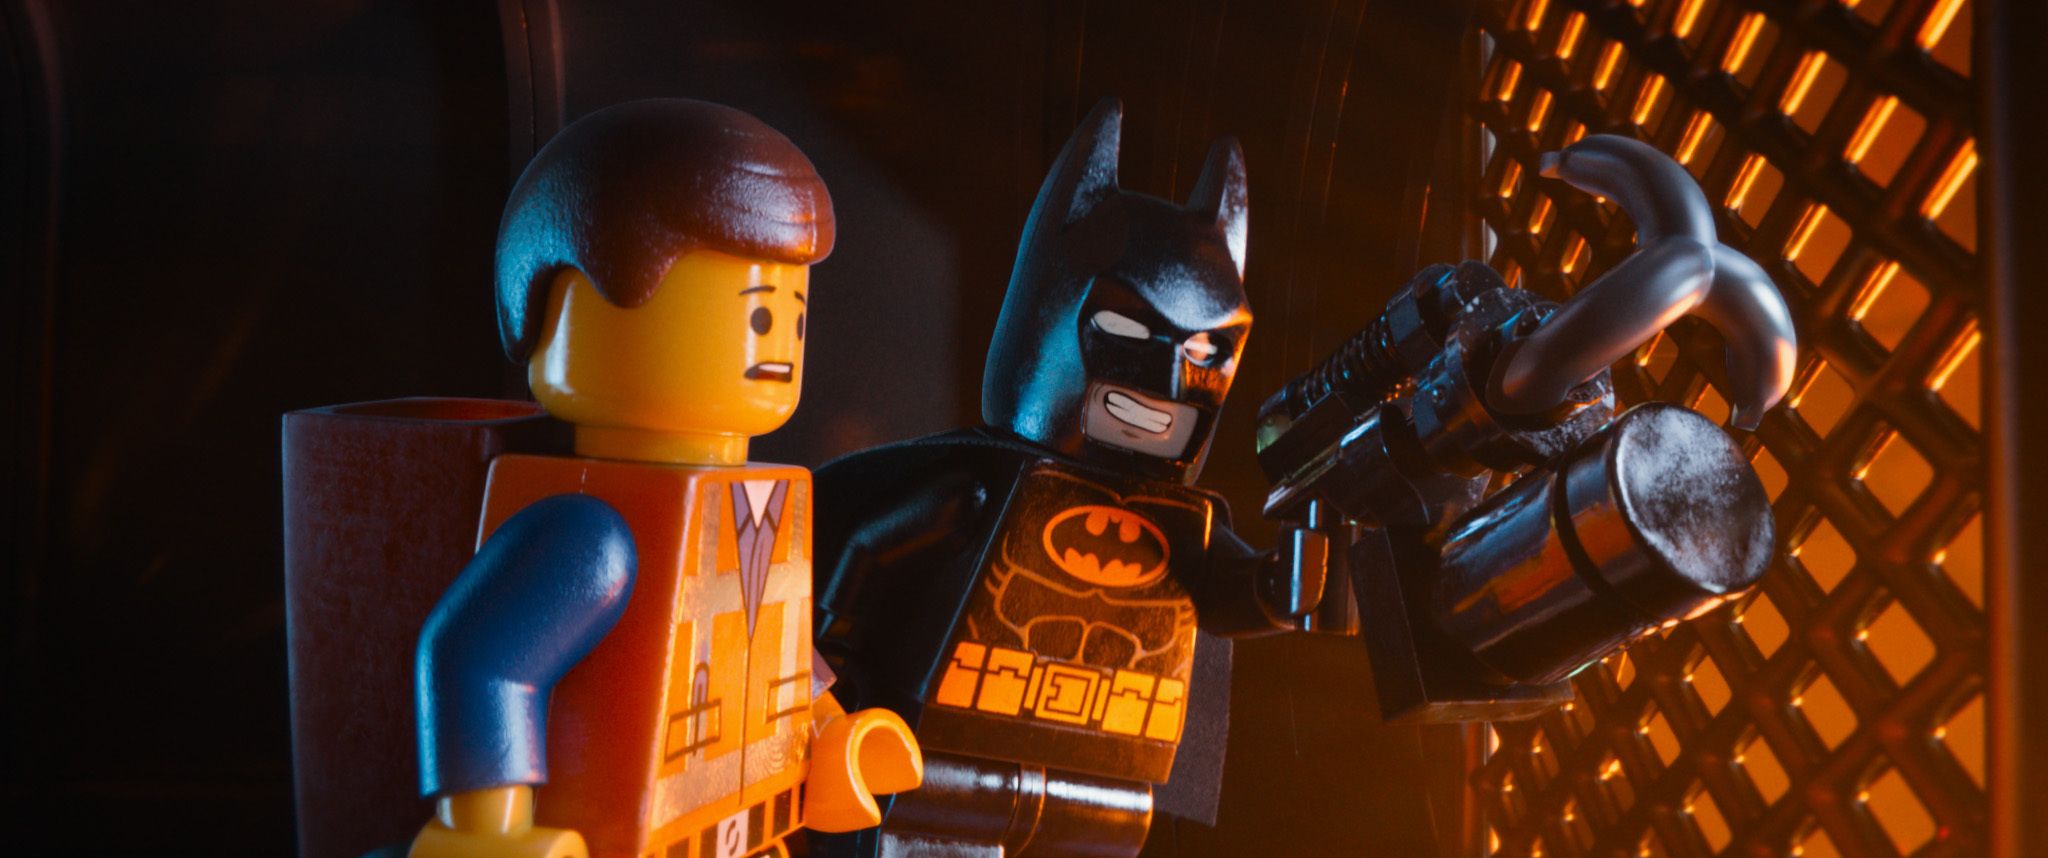 Ralph Fiennes Cast as Alfred in The LEGO Batman Movie – DC Comics